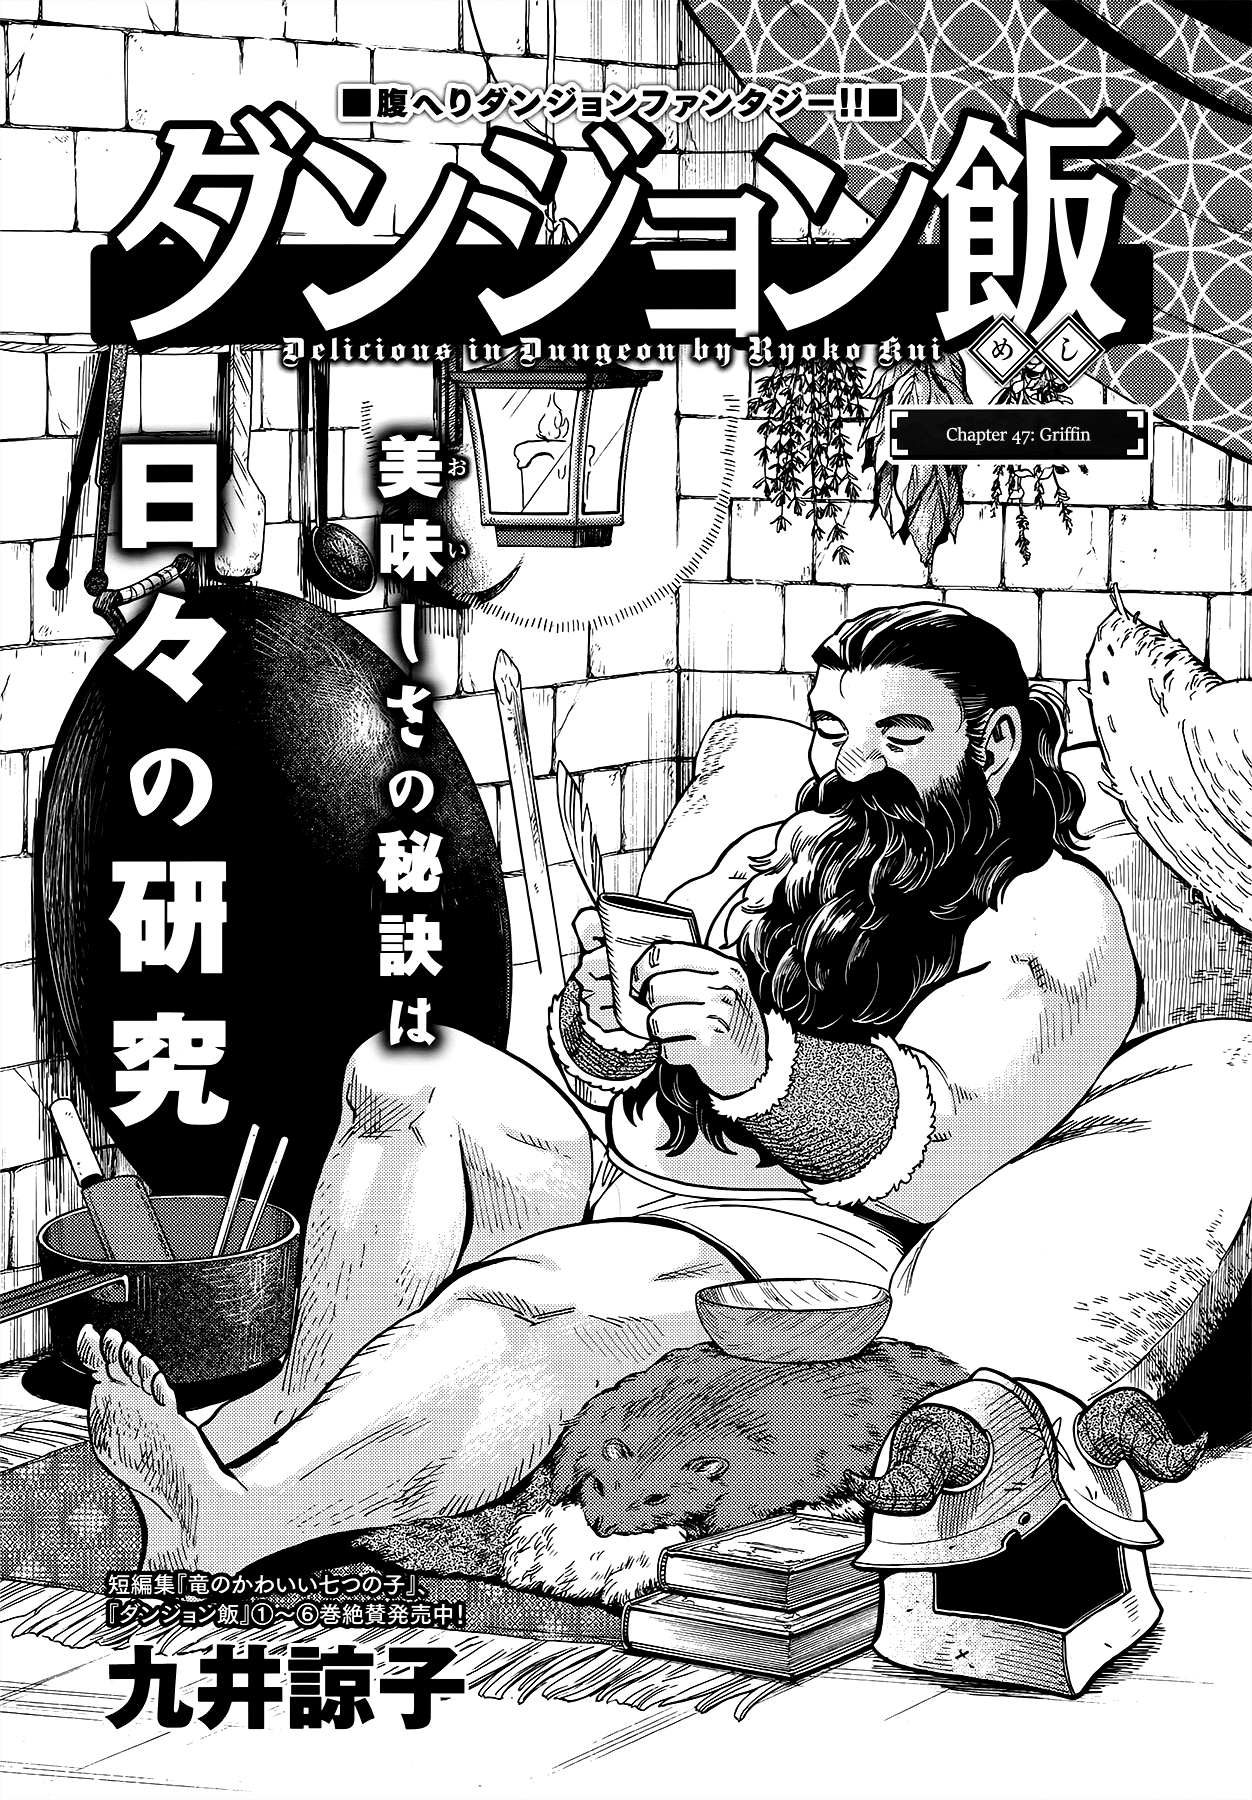 Dungeon Meshi Vol.7-Chapter.47-Griffin Image